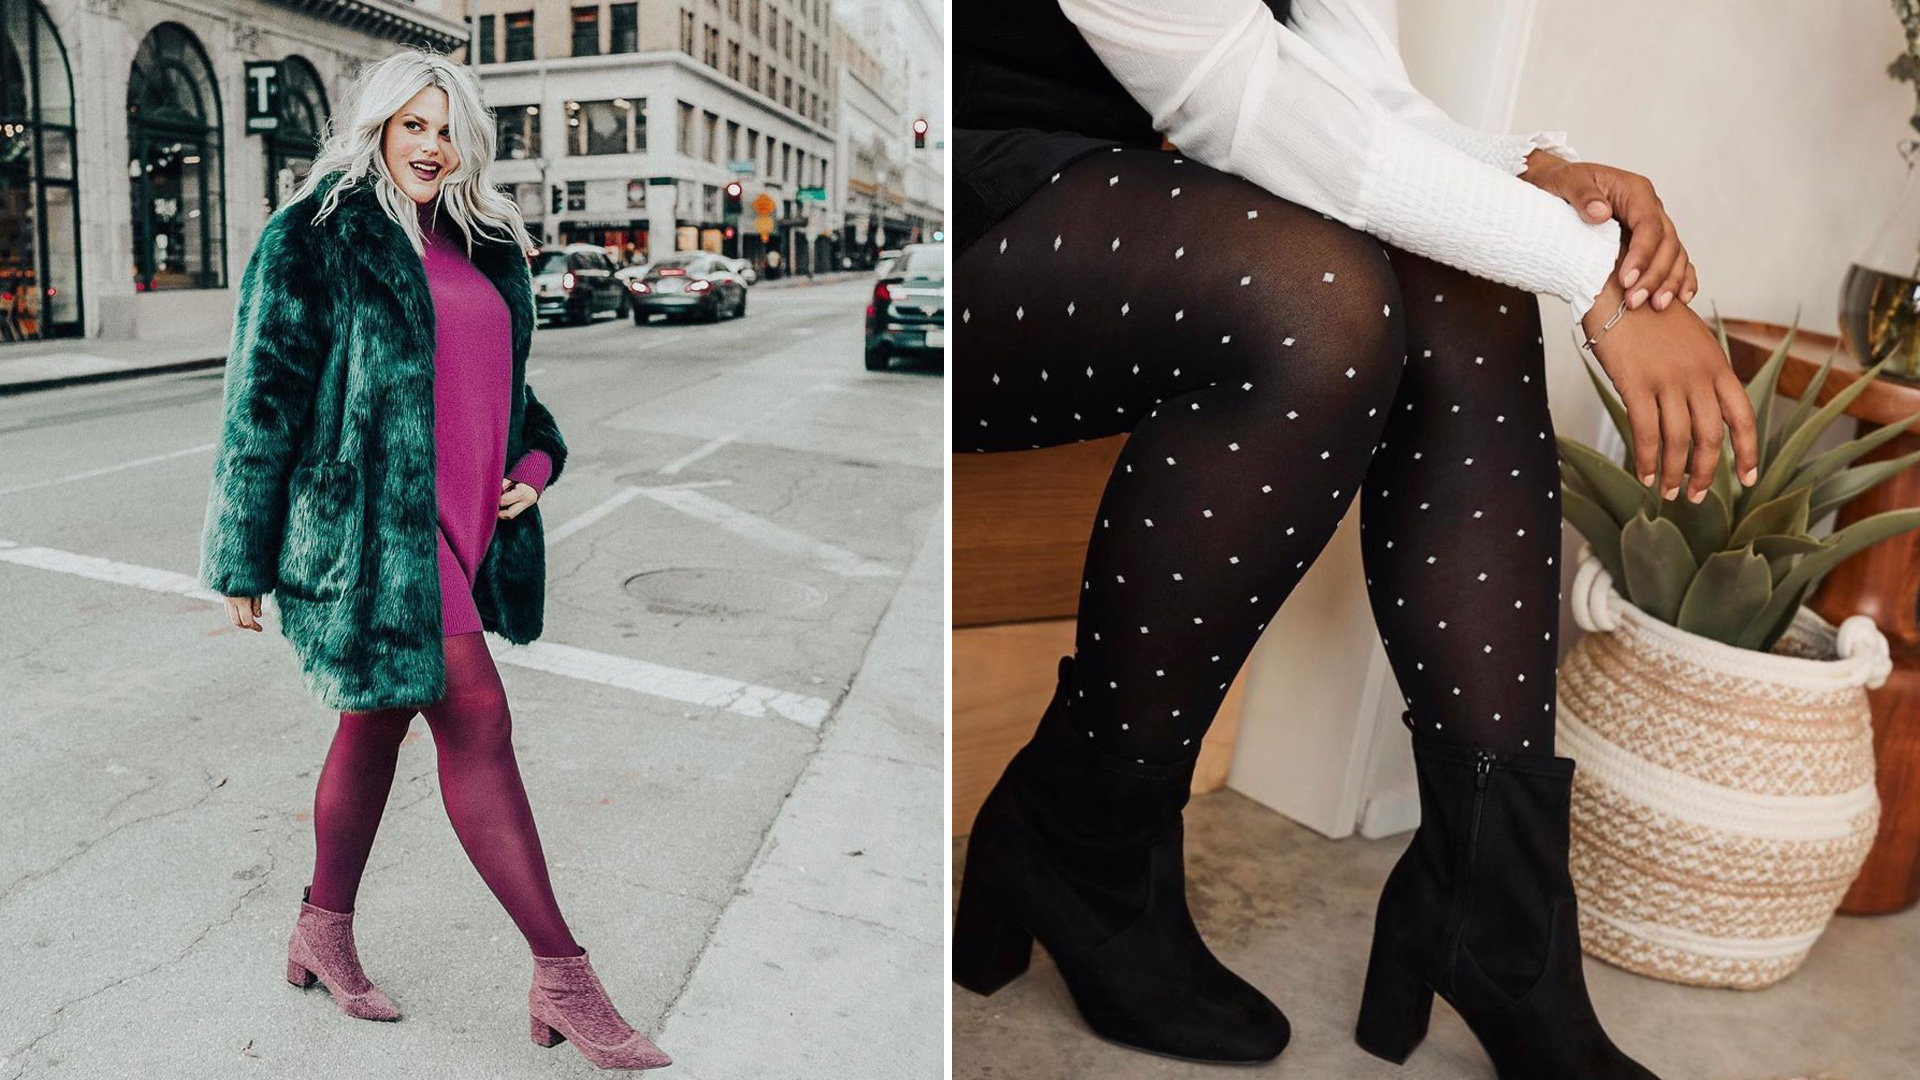 6 Of The Best Places To Buy Plus-Size Tights Right Now